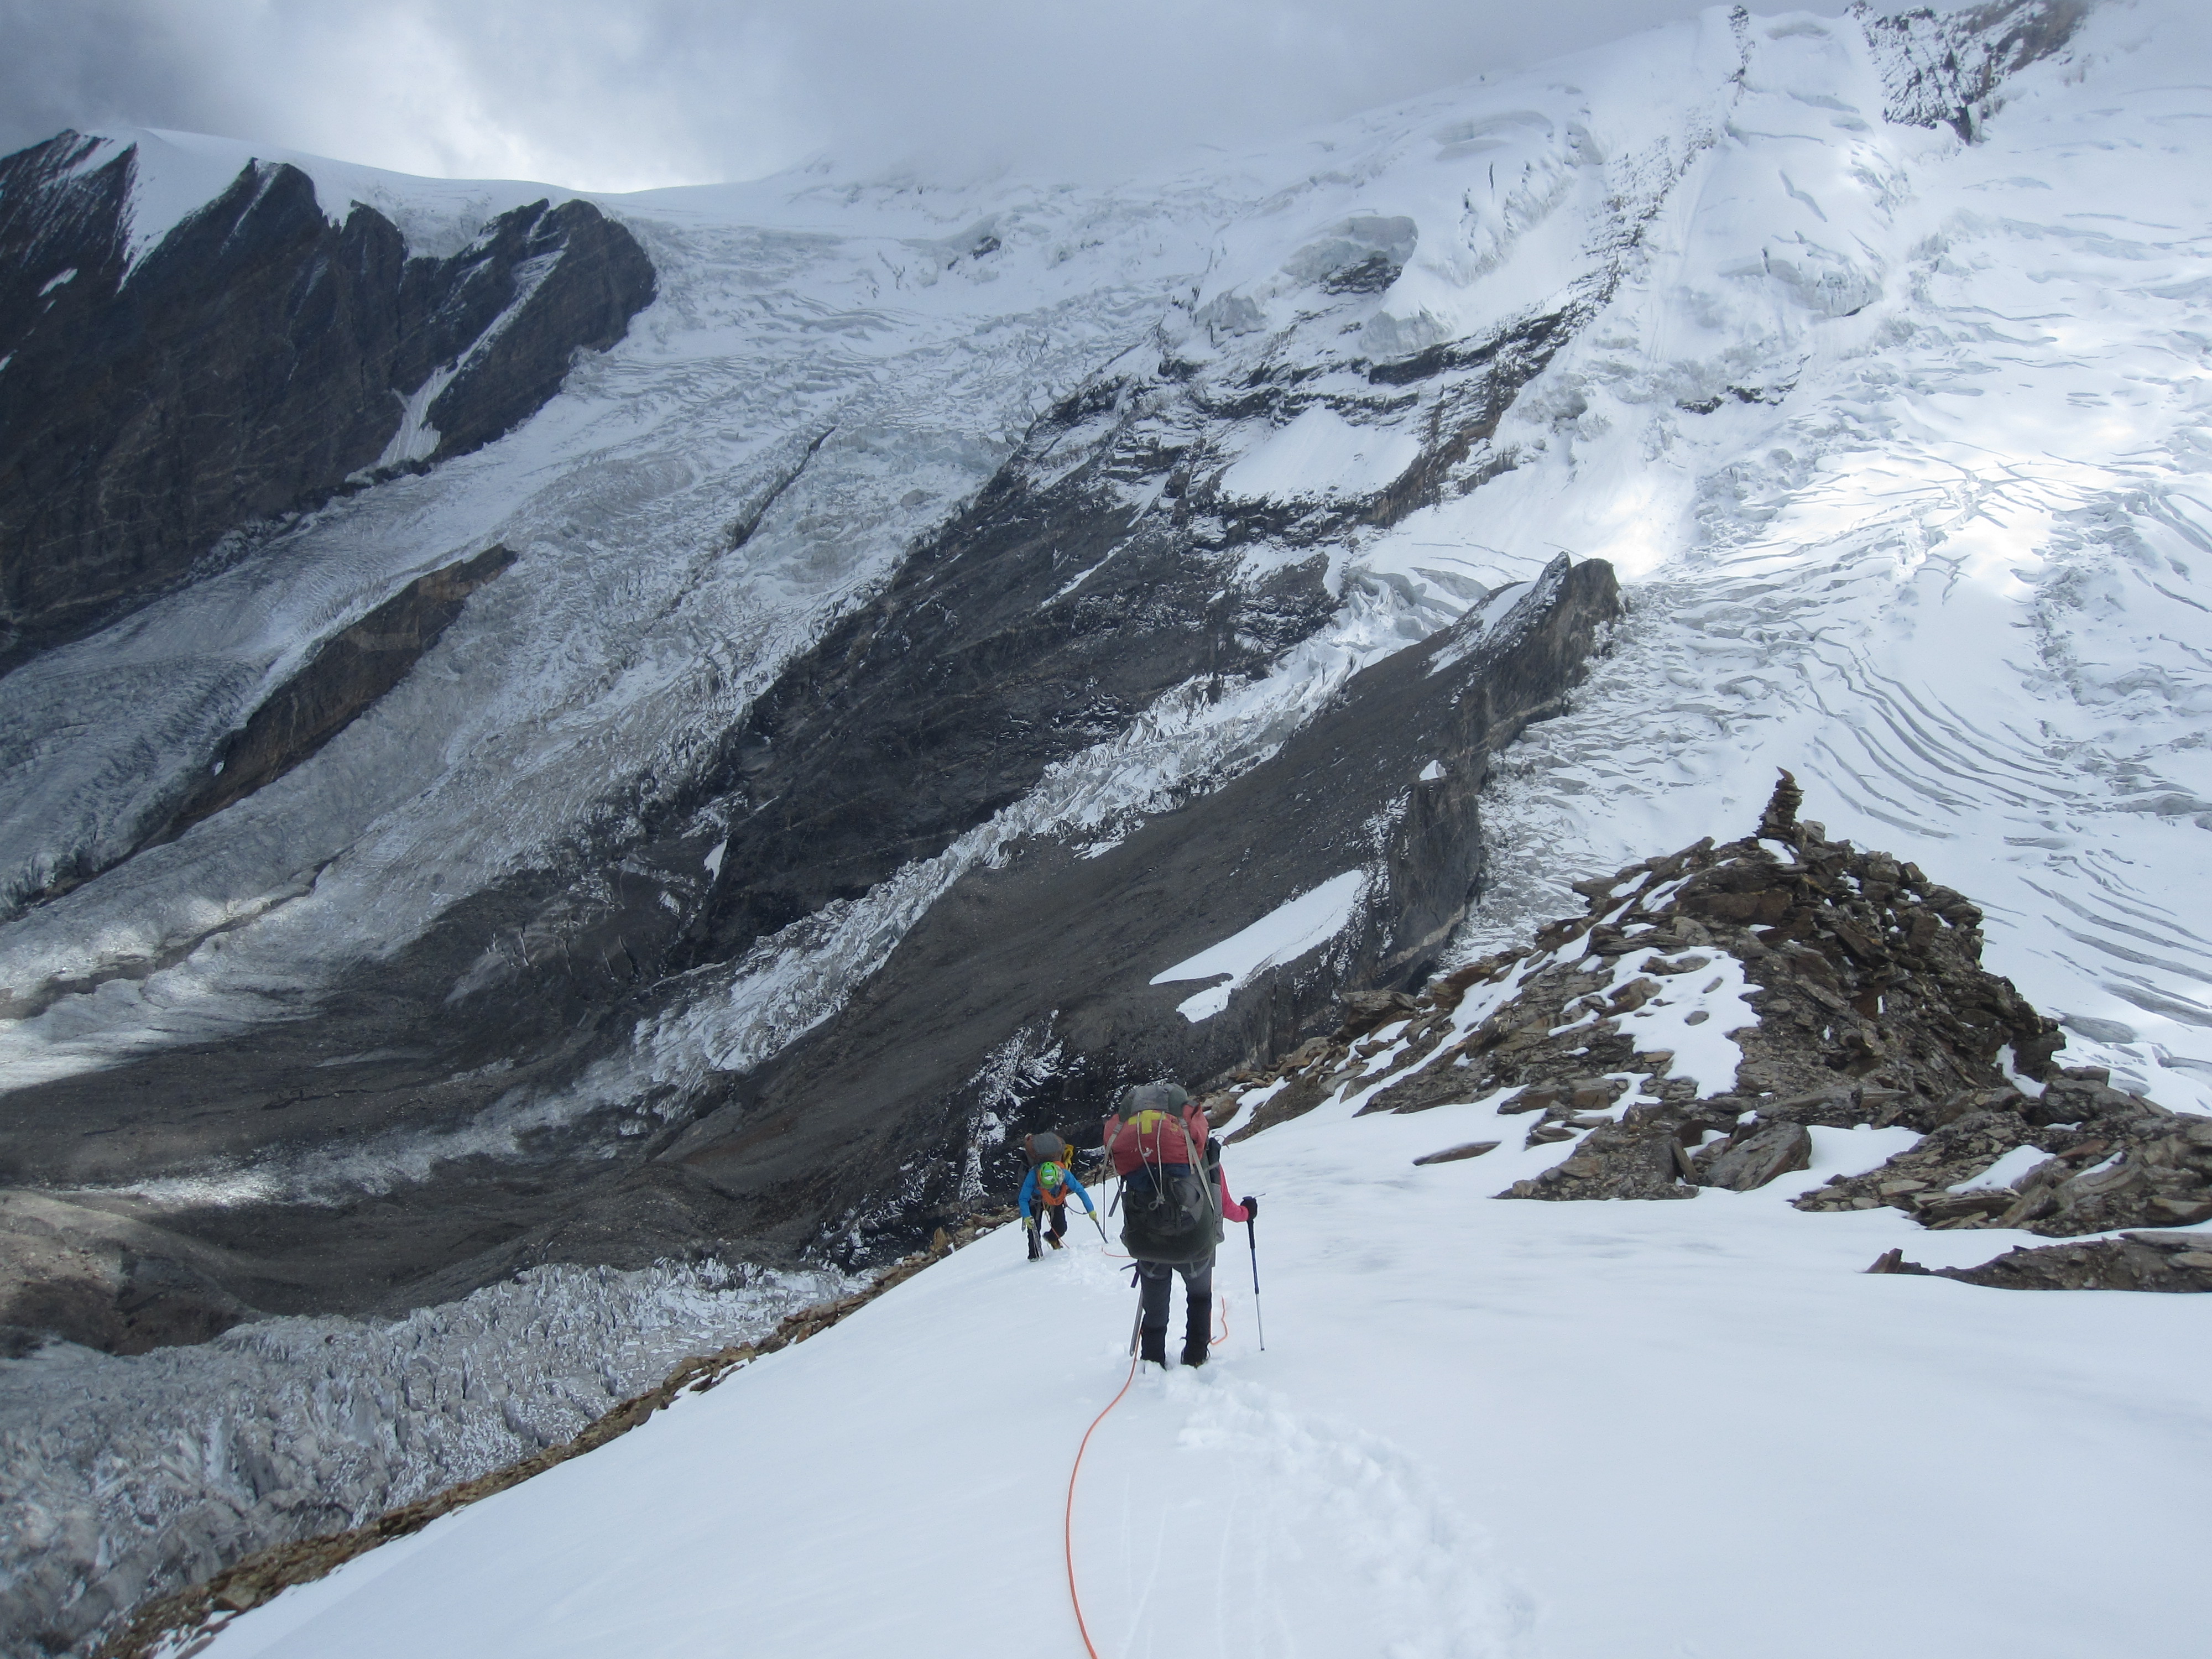 Heading down after summiting the Dhana Dura pass.